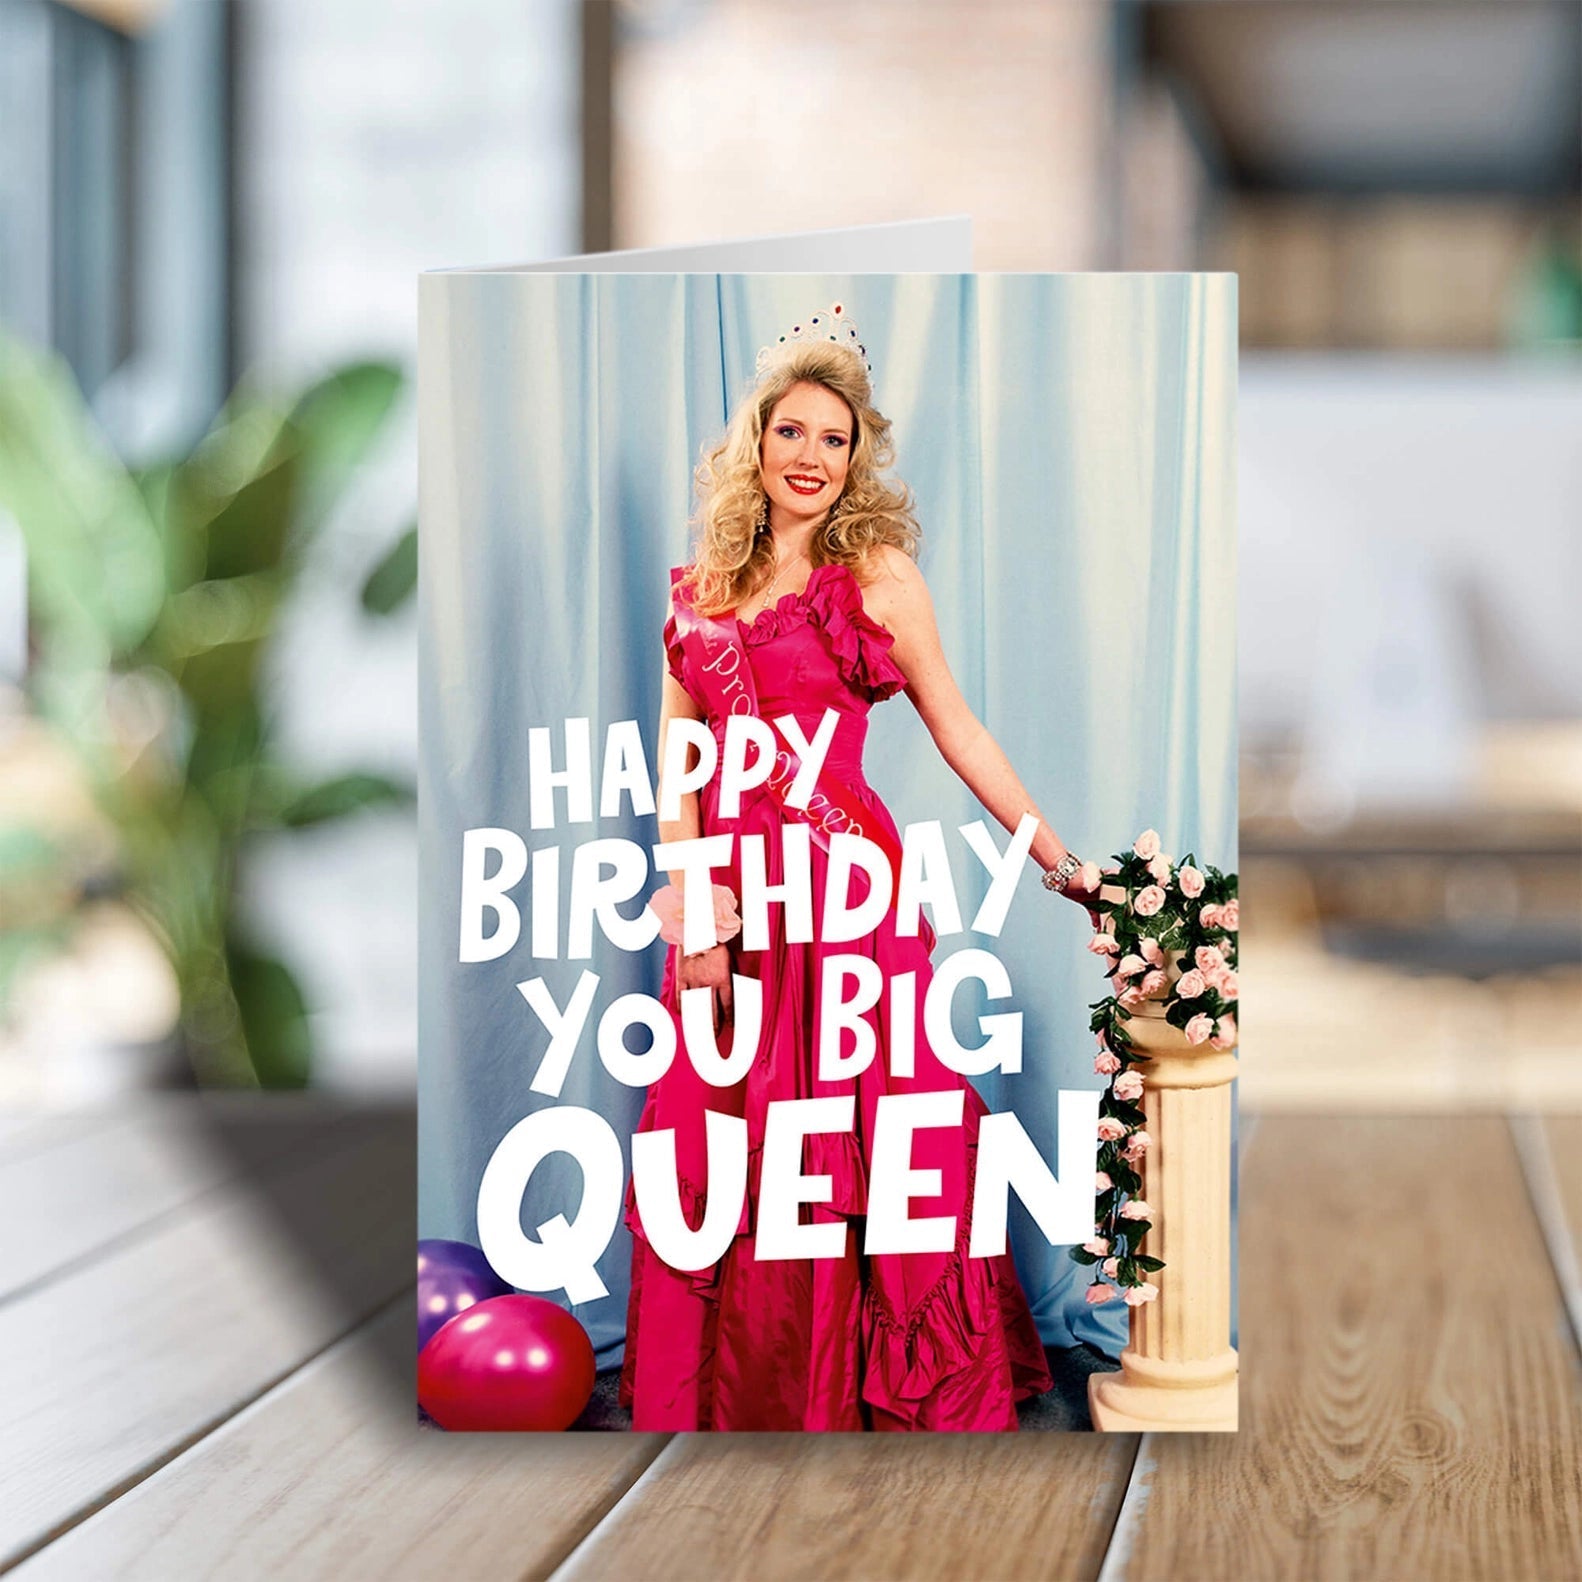 Happy Birthday You Big Queen Greeting Card